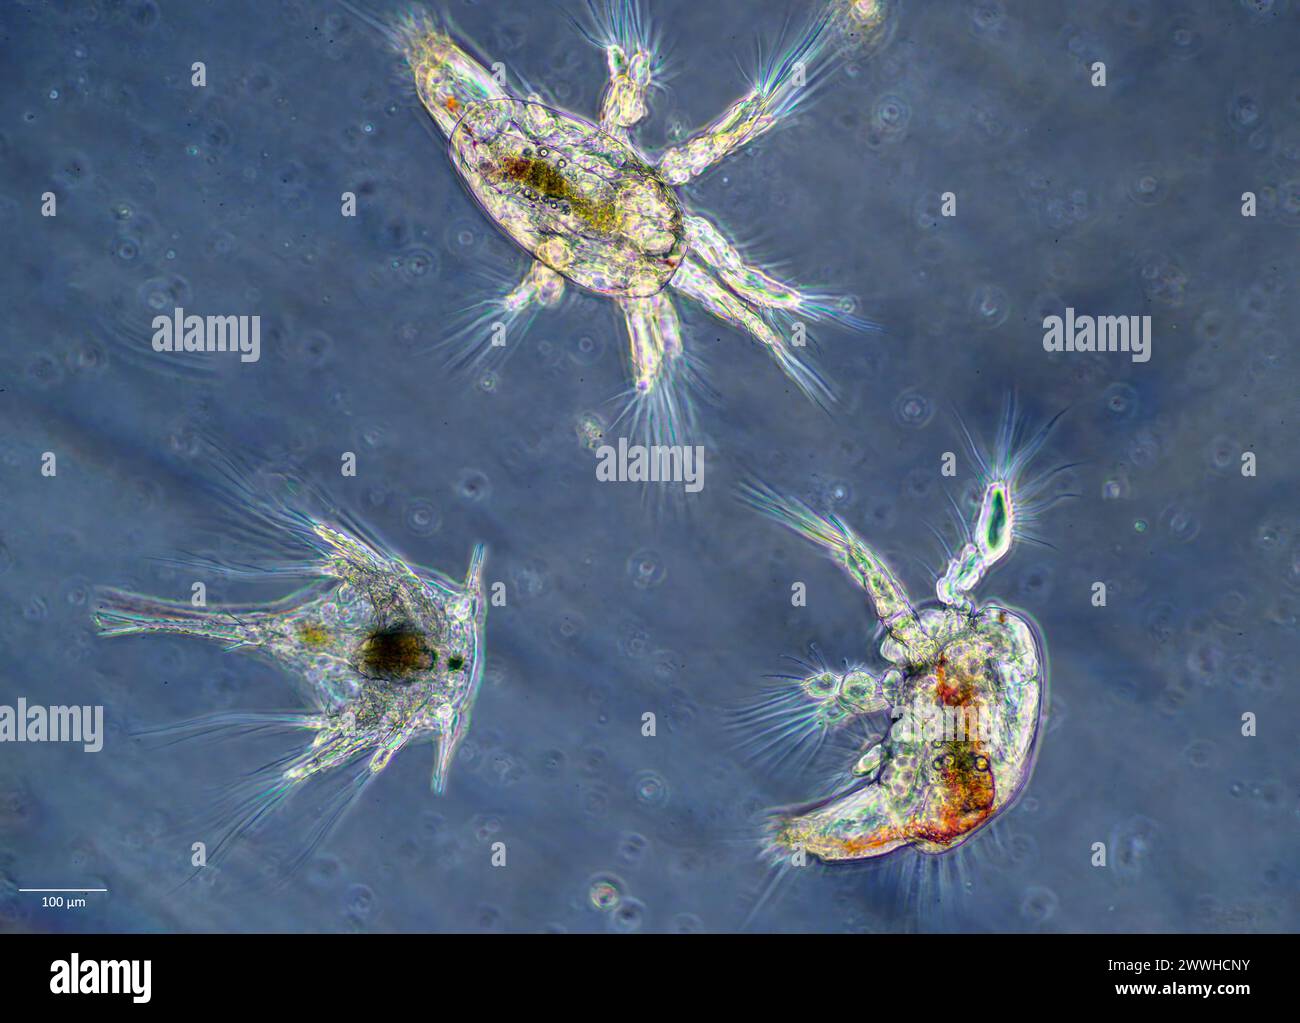 Two copepod nauplius larva and one cirripedia larvae (Balanus sp., bottom left) sampled from surface water, south-western Norway in March. Stock Photo